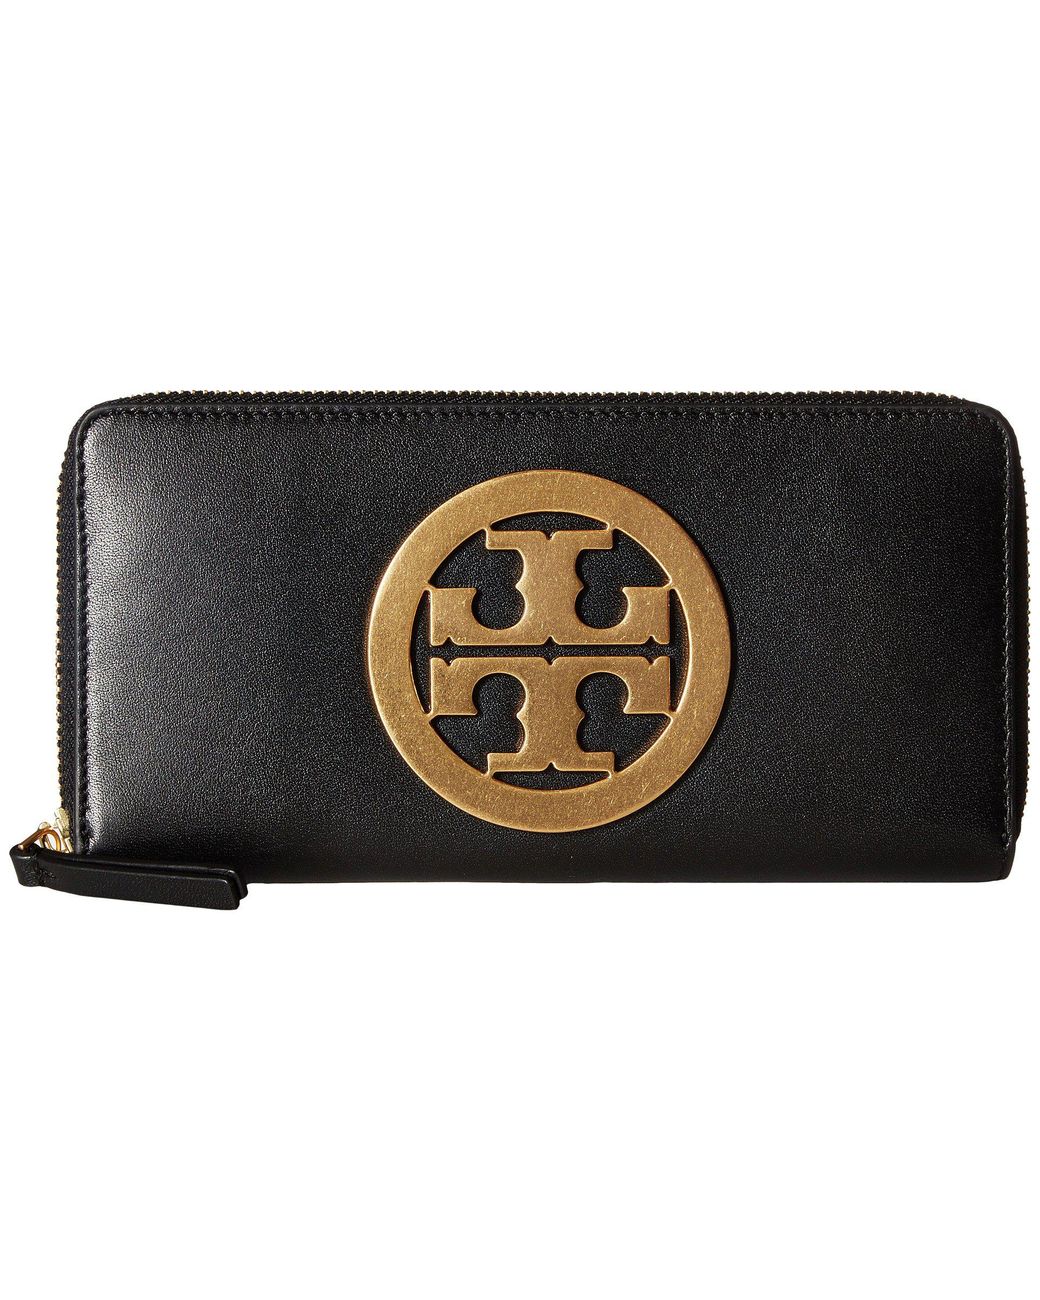 Tory Burch Charlie Zip Around Gold Reva Continental Wallet Black Leather  